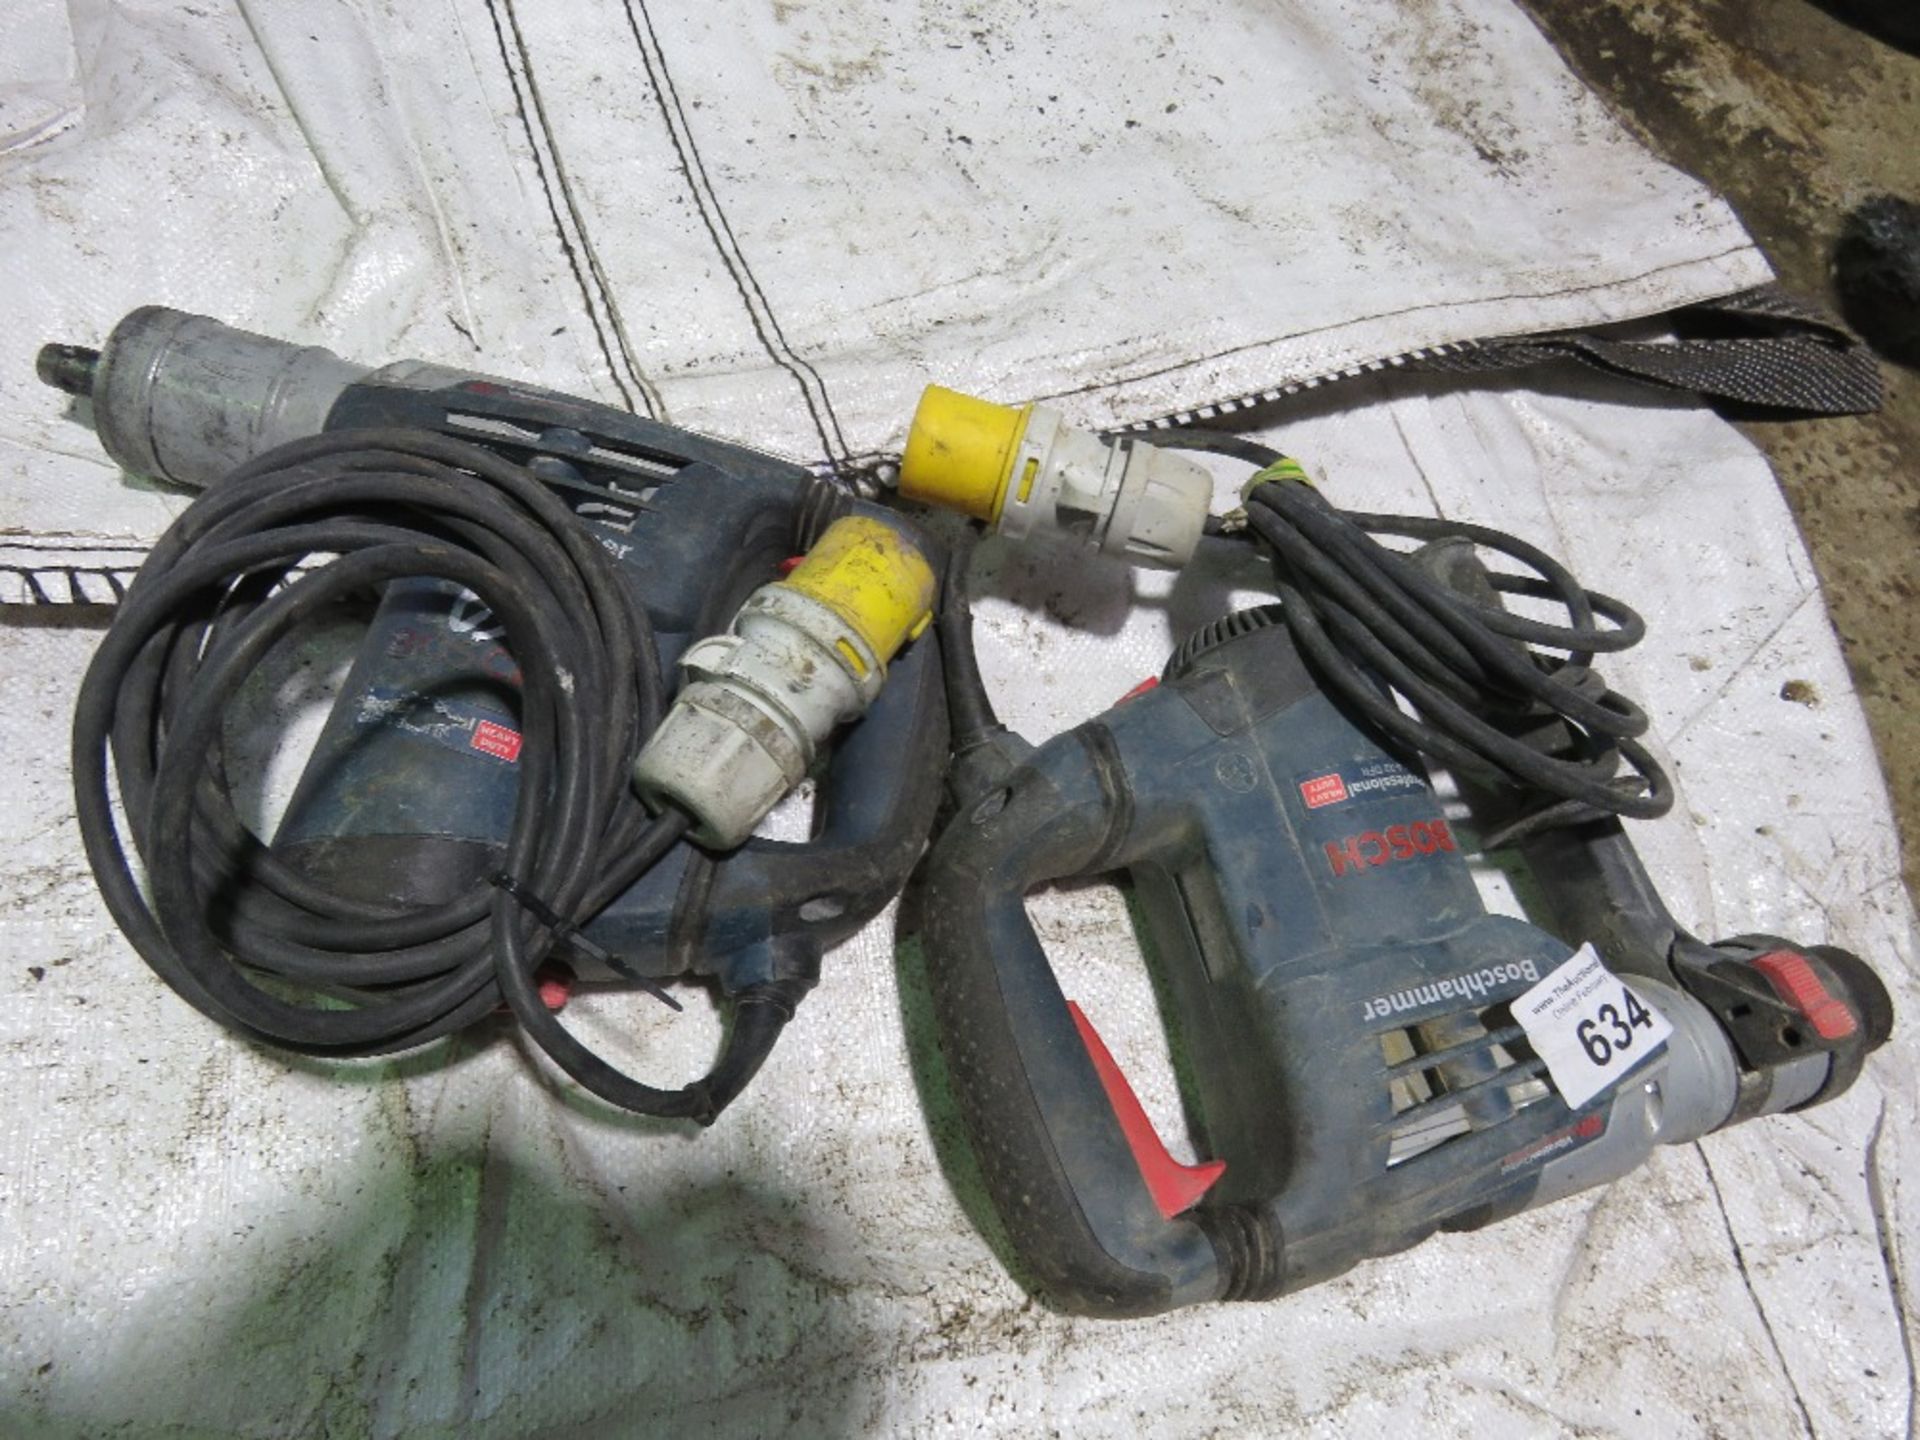 2 X BOSCH 110VOLT BREAKER DRILLS. THIS LOT IS SOLD UNDER THE AUCTIONEERS MARGIN SCHEME, THEREFORE